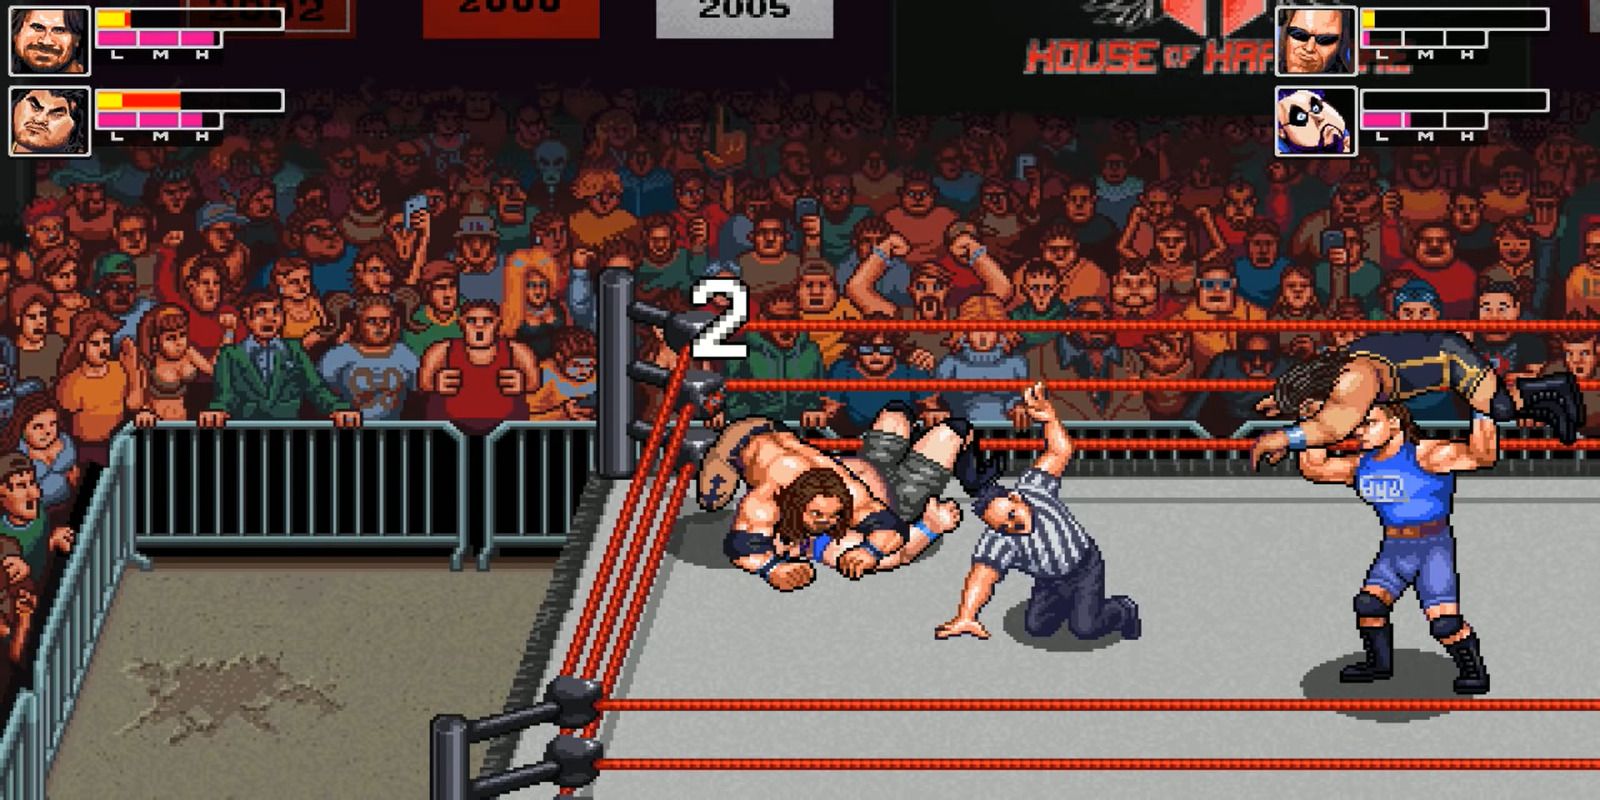 Pin attempt as other wrestlers fight in the ring